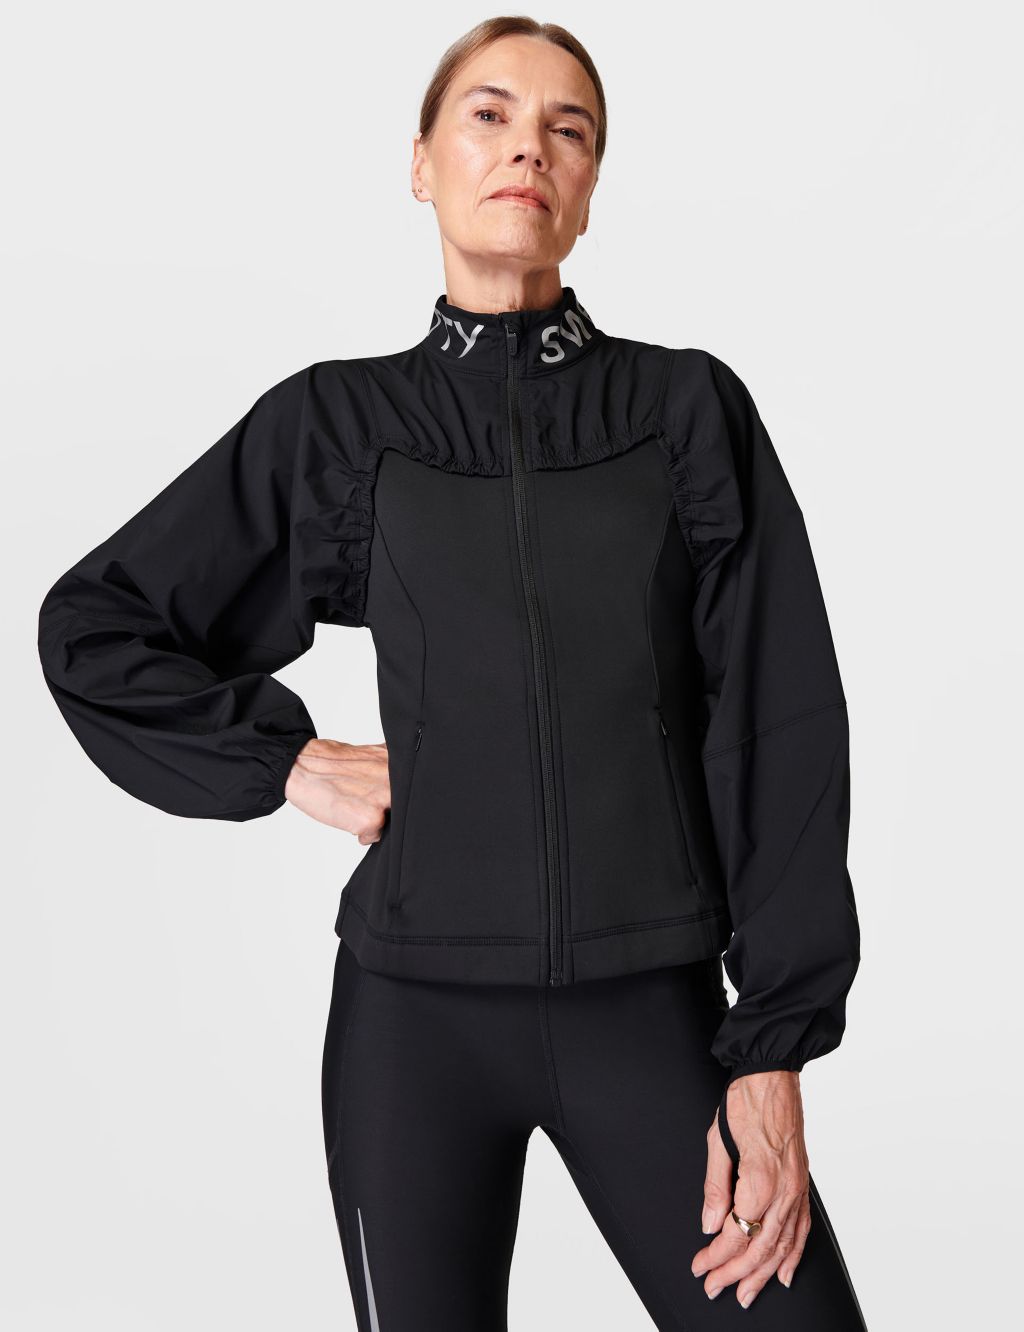 Therma Boost Lightweight Running Jacket image 1